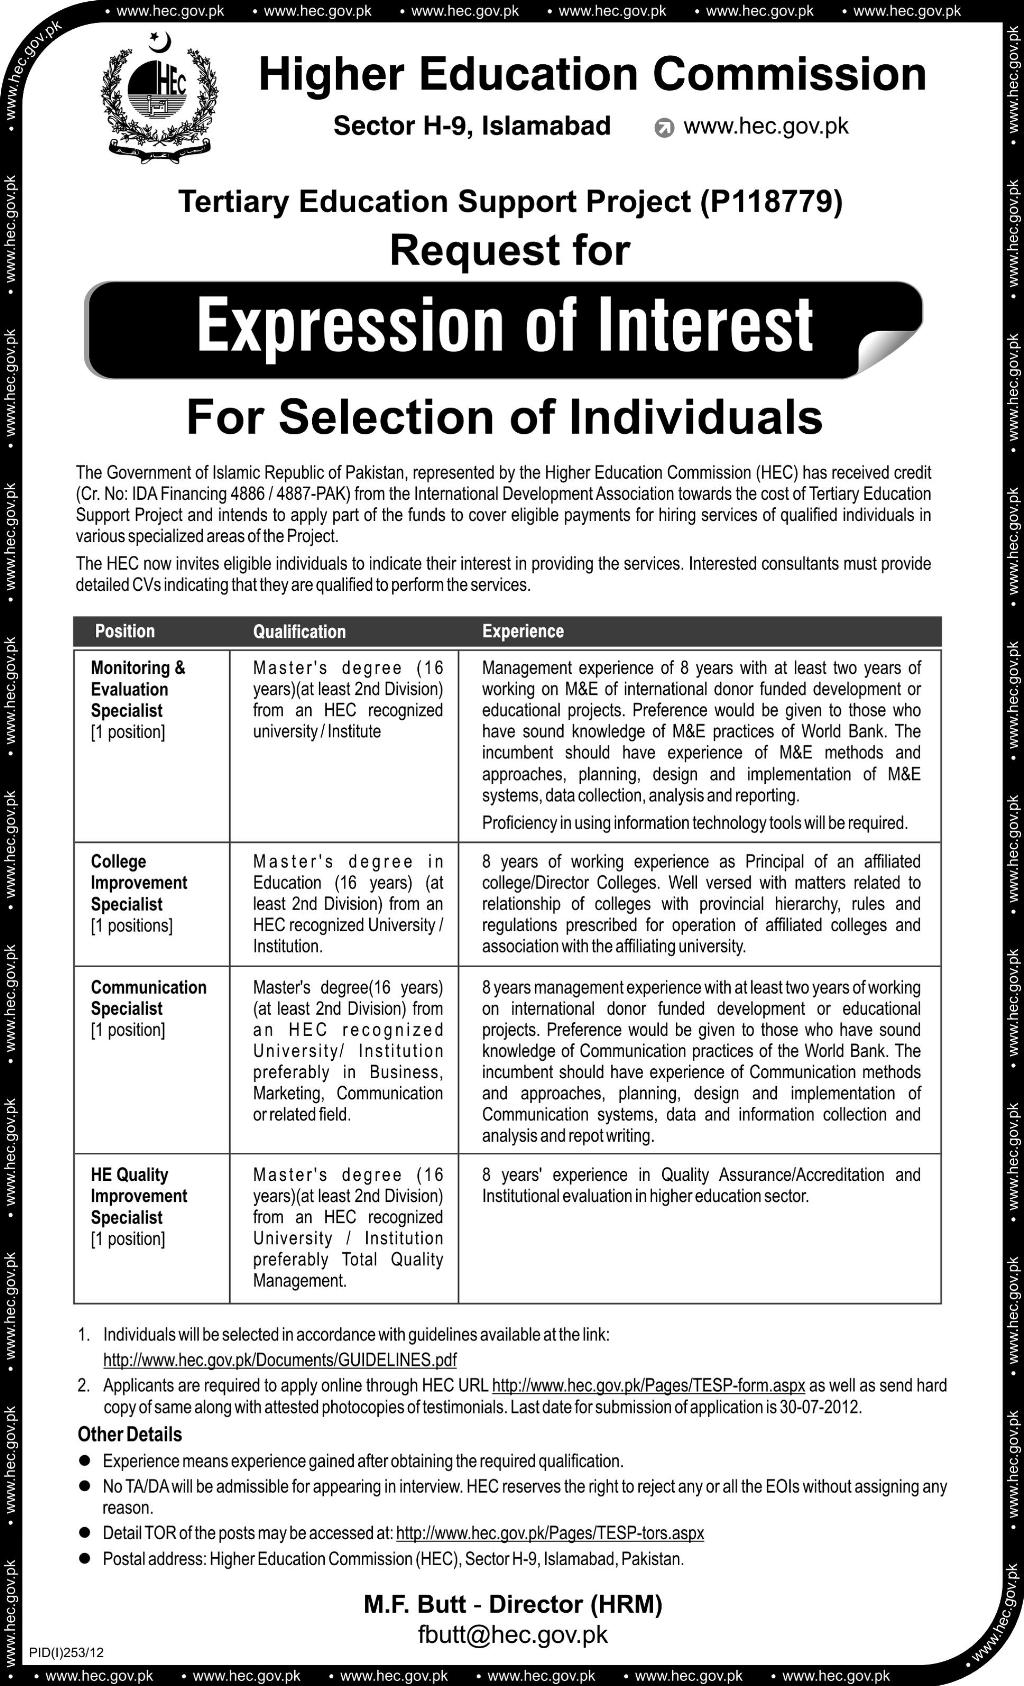 HEC Higher Education Commission Requires Specialists (Government Job)